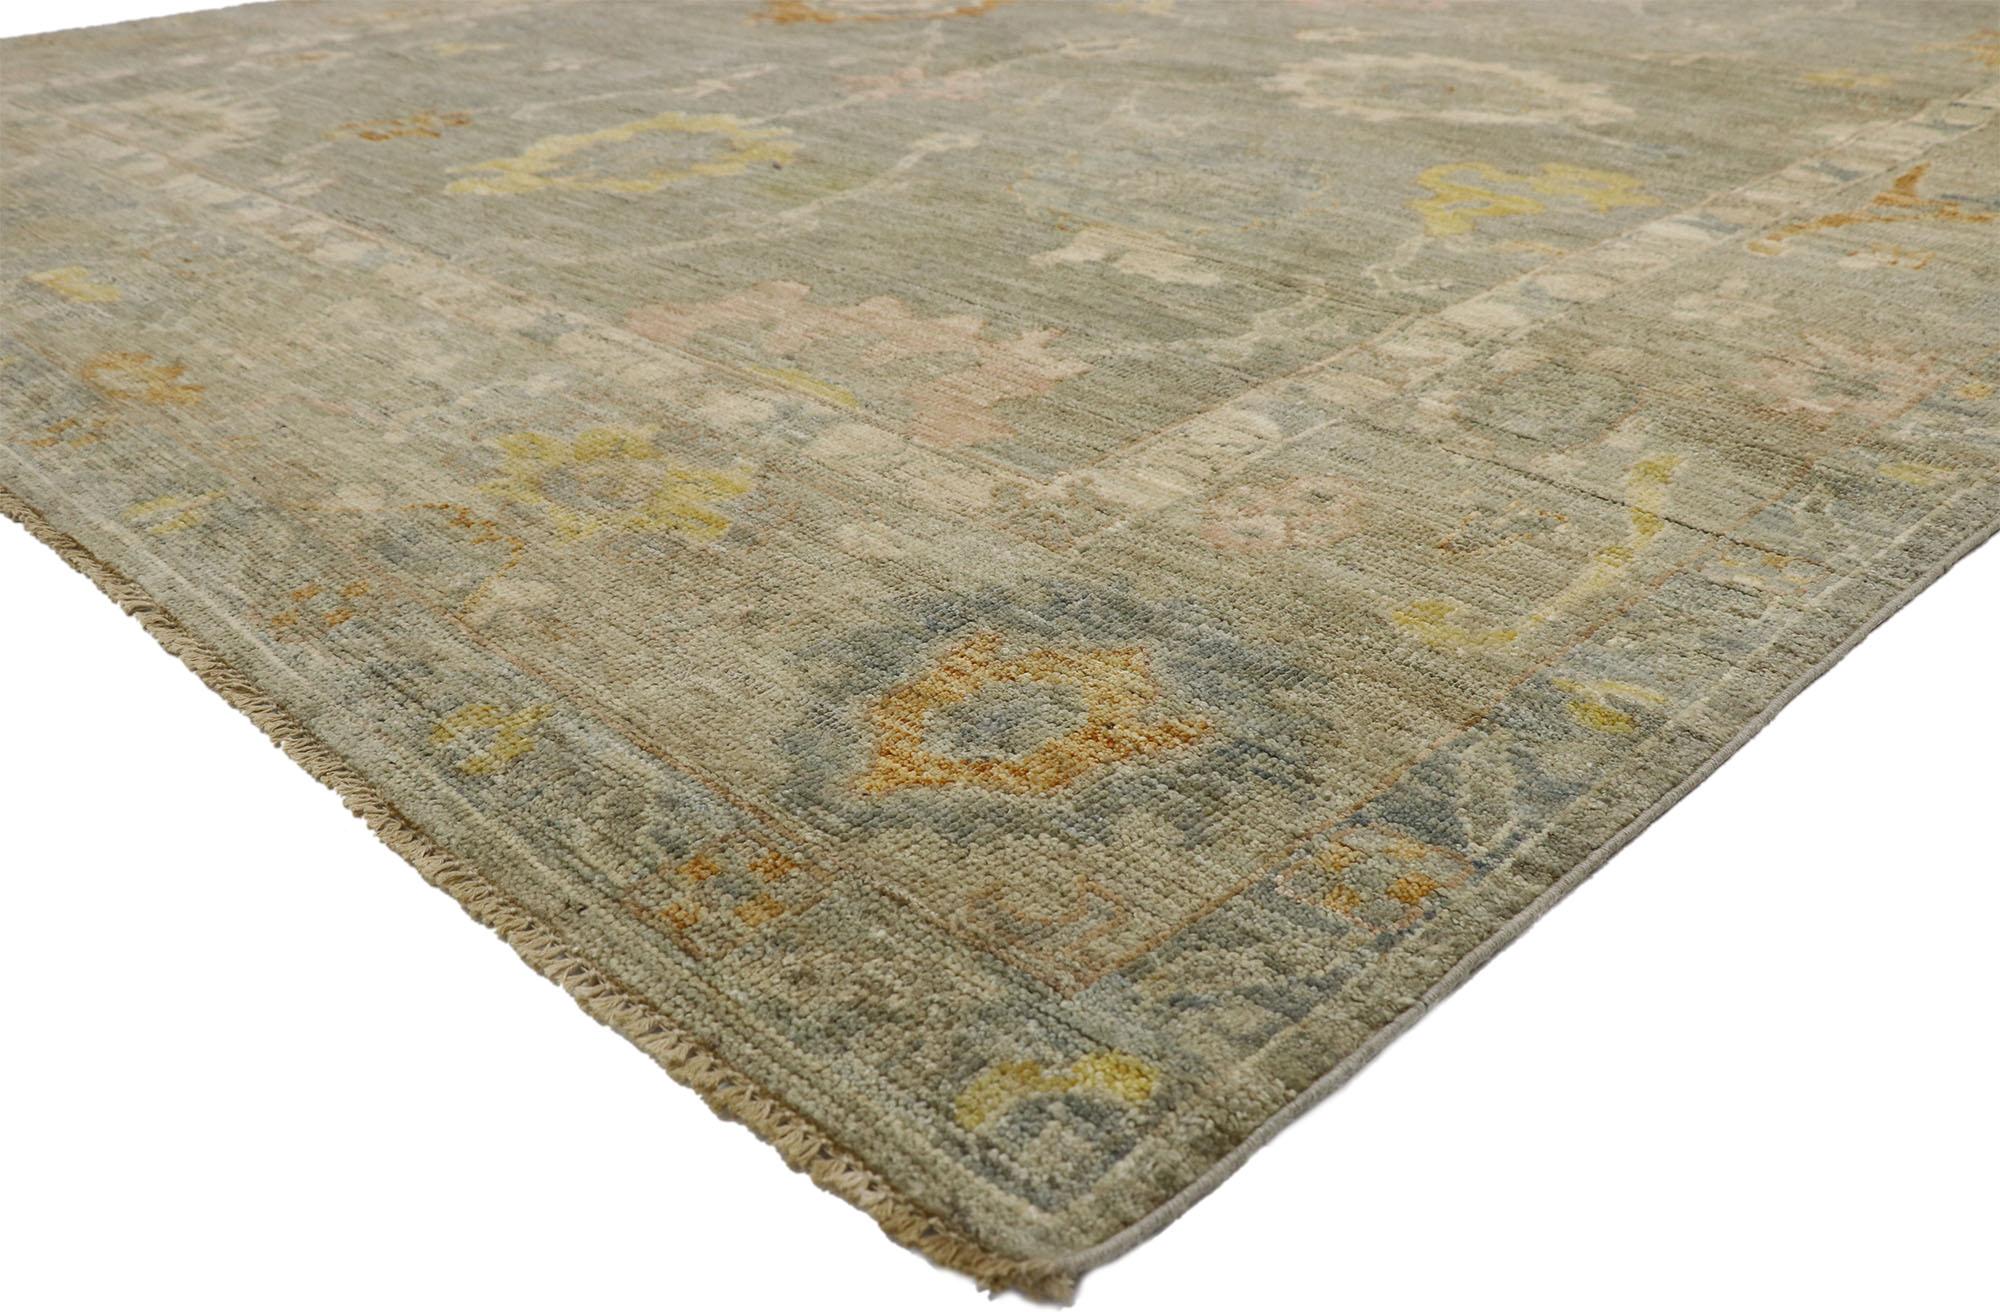 80524 New Vintage-Inspired Oushak Rug, 09'03 x 12'03. 
Highly stylish yet tastefully casual, this vintage-inspired Oushak area rug features an allover geometric pattern composed of Harshang motifs, blooming palmettes, leafy tendrils, curved sickle